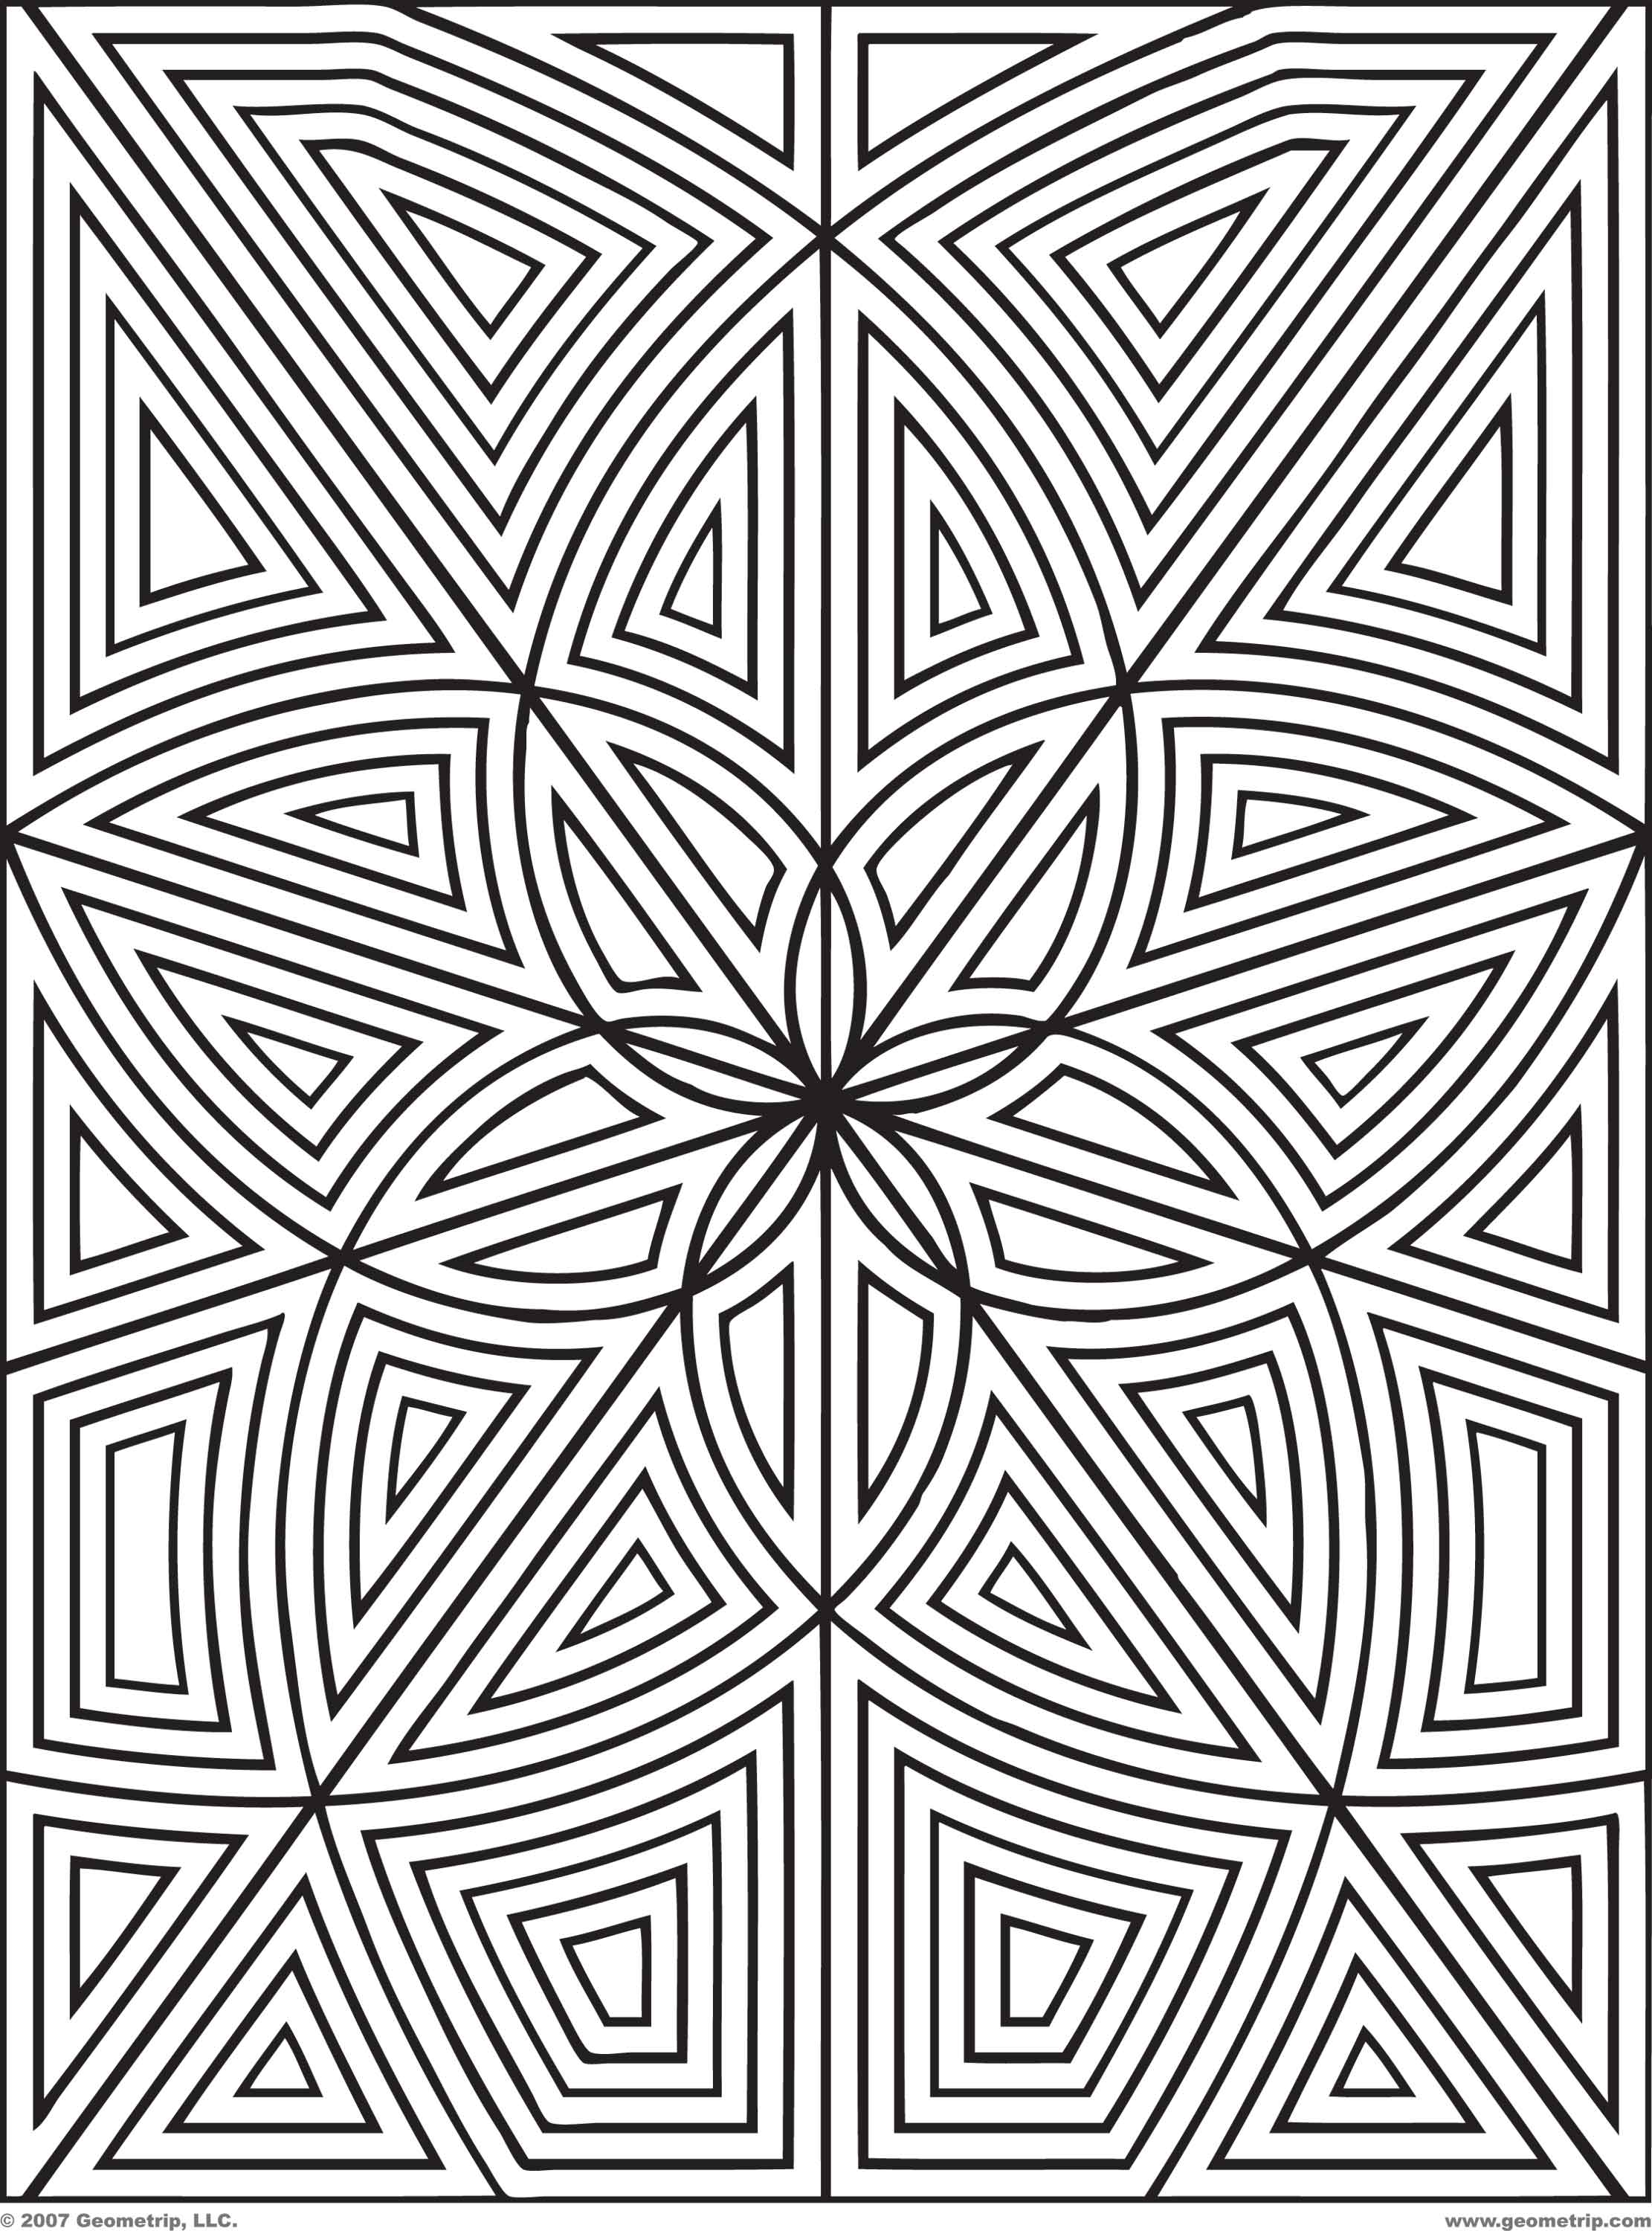 Awesome Coloring Pages To Print - Coloring